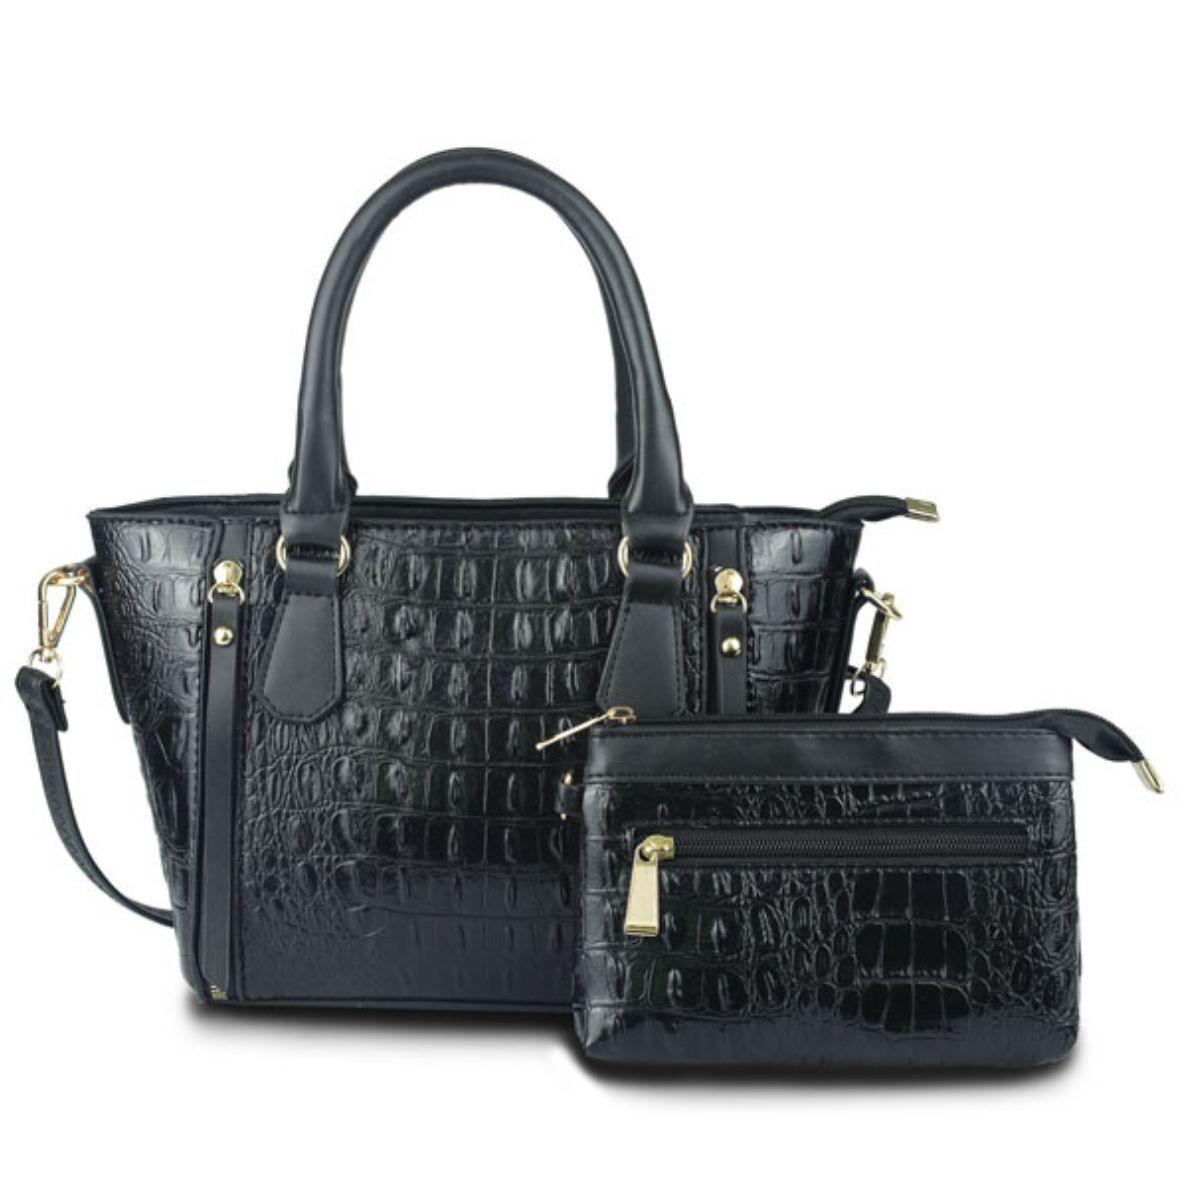 Premium Black Croc Textured Vegan Leather Tote Handbag Set with Double Zipper Wristlet - Luxe Sophistication for Style and Security